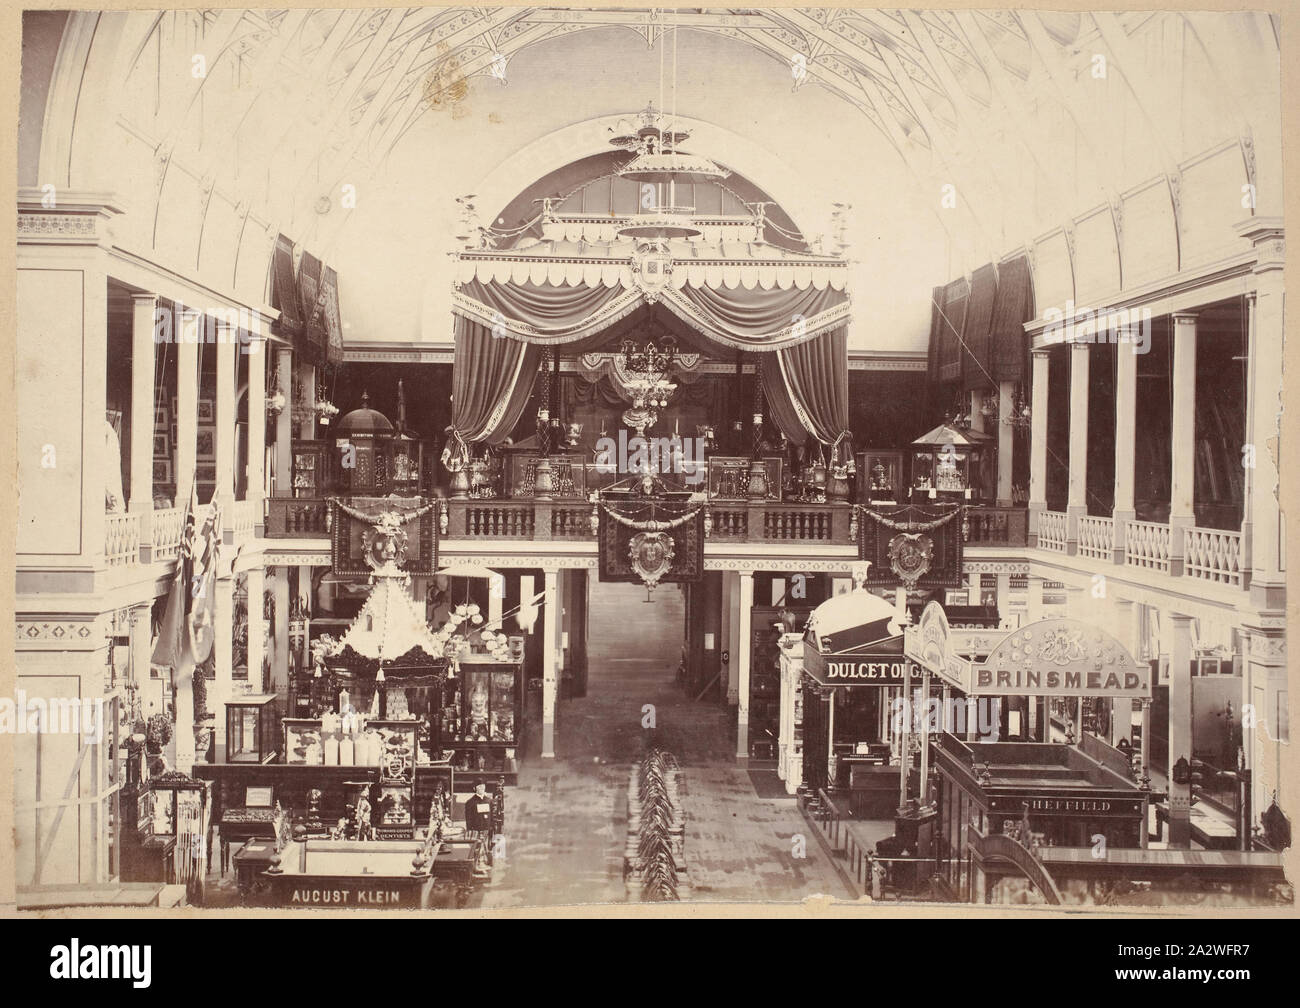 Photograph - German Imperial Tent, North Transept, Great Hall, Exhibition Building, 1880-1881, View of the German Imperial Tent on the balcony of the north transept of the Great Hall of the permanent Exhibition Building at the 1880 Melbourne International Exhibition held at the Exhibition Buildings, Carlton Gardens, between 1 October 1880 and 30 April 1881. While the official plans for the exhibition show Germany having been allocated various court space in at least three different areas Stock Photo